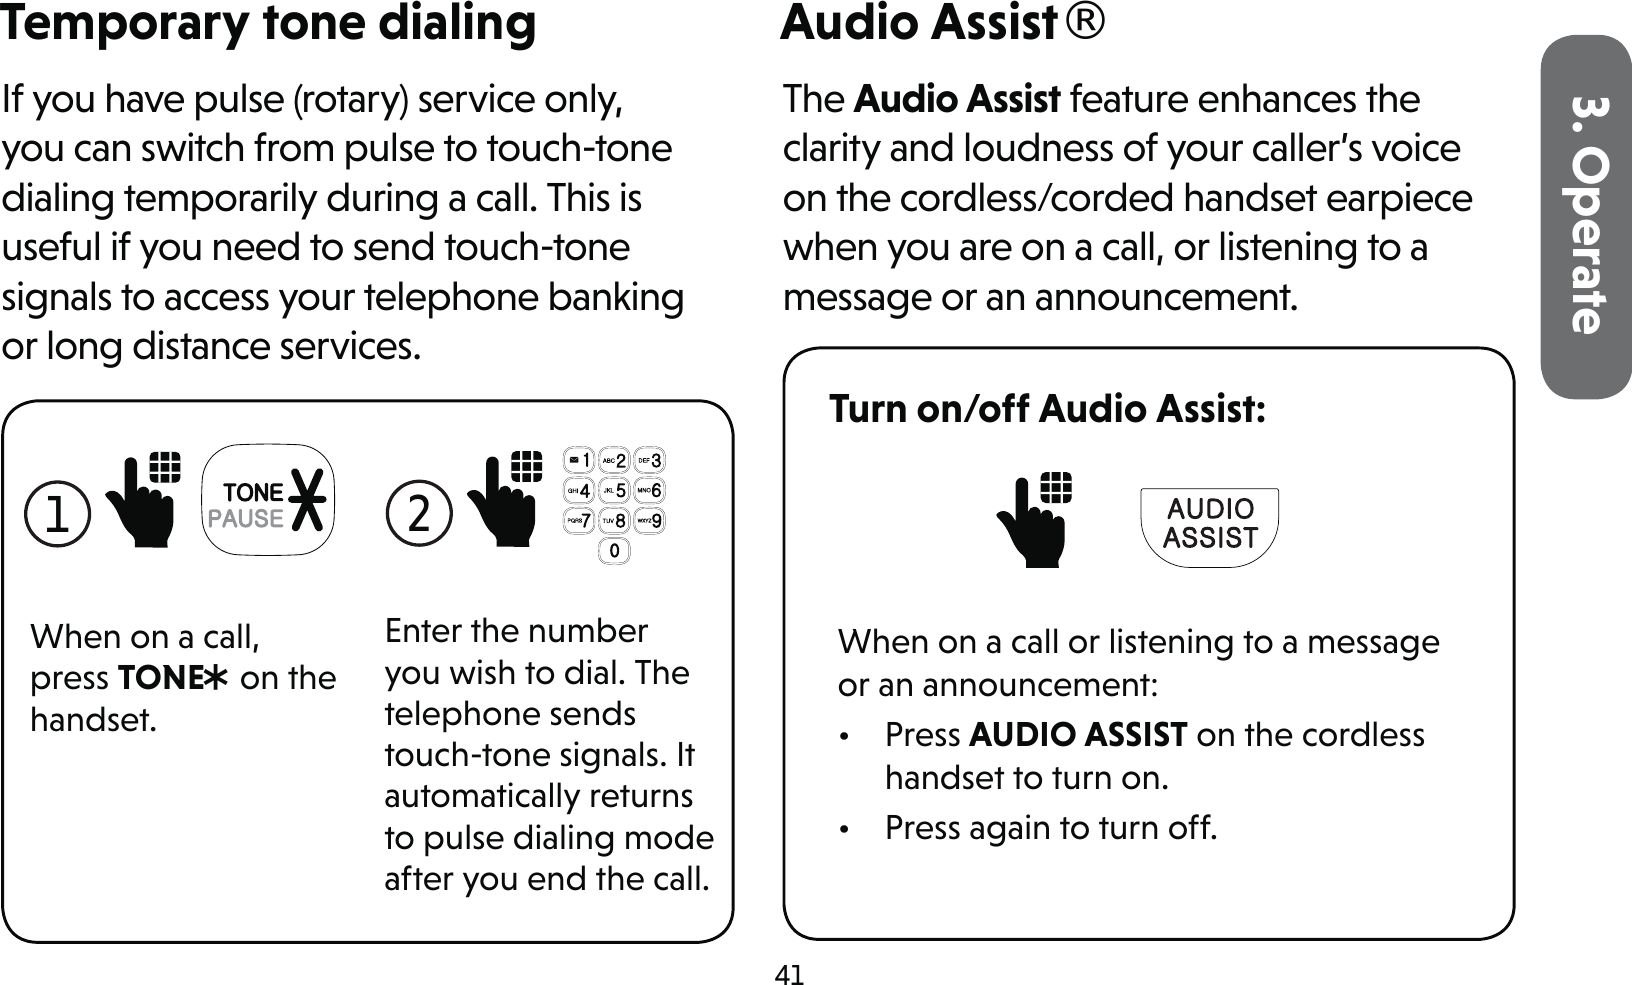 413. OperateTemporary tone dialingIf you have pulse (rotary) service only, you can switch from pulse to touch-tone dialing temporarily during a call. This is useful if you need to send touch-tone signals to access your telephone banking or long distance services.1 When on a call, press TONE* on the handset.2 Enter the number you wish to dial. The telephone sends touch-tone signals. It automatically returns to pulse dialing mode after you end the call.Audio Assist®The Audio Assist feature enhances the clarity and loudness of your caller’s voice on the cordless/corded handset earpiece when you are on a call, or listening to a message or an announcement.Turn on/off Audio Assist: When on a call or listening to a message or an announcement:• Press AUDIO ASSIST on the cordless handset to turn on.•  Press again to turn off.